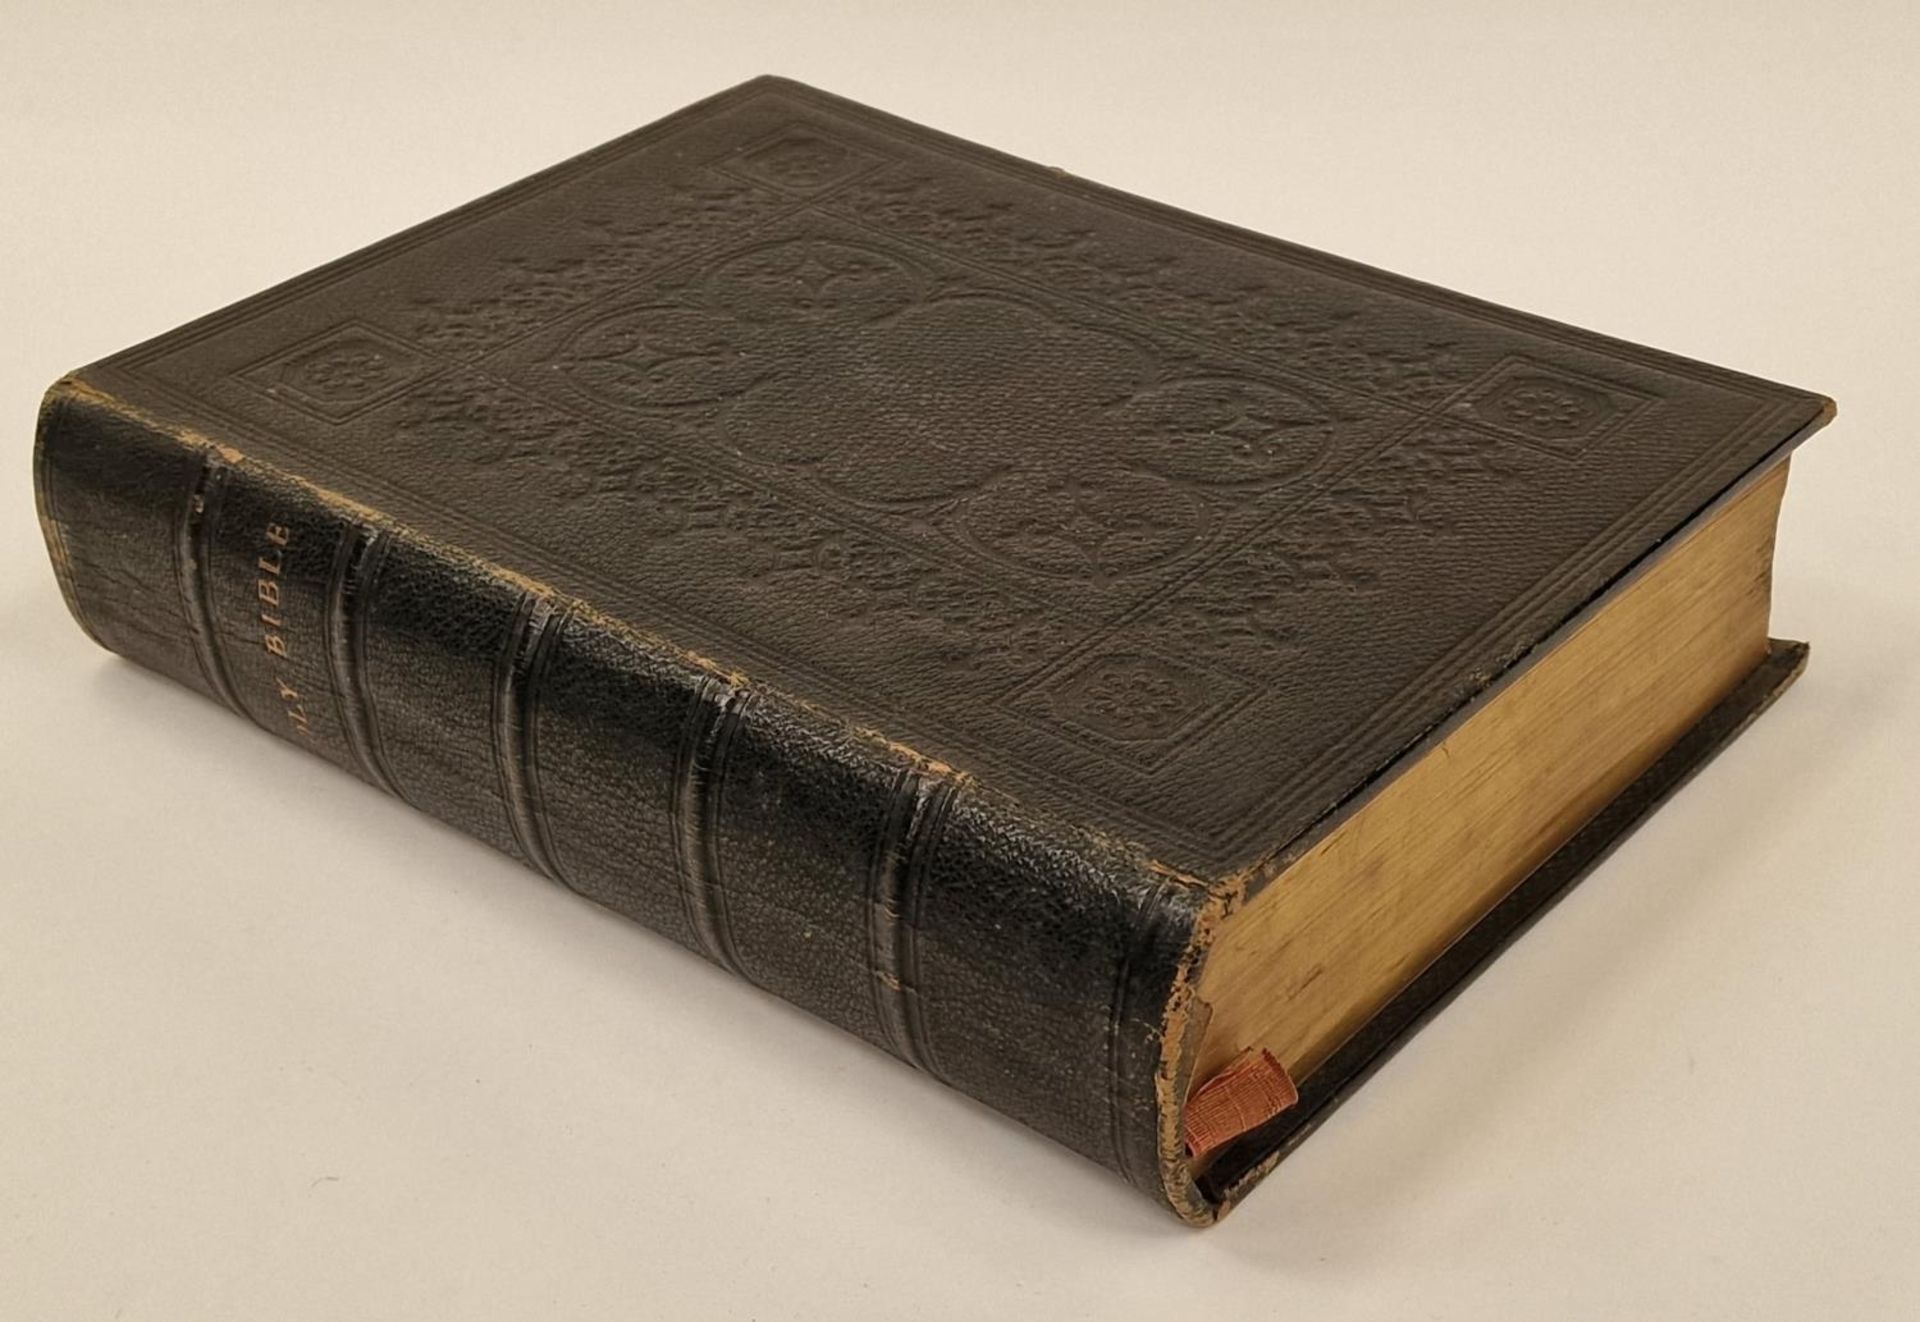 19th century Holy Bible by Eyre and Spottiswoode - Image 4 of 4